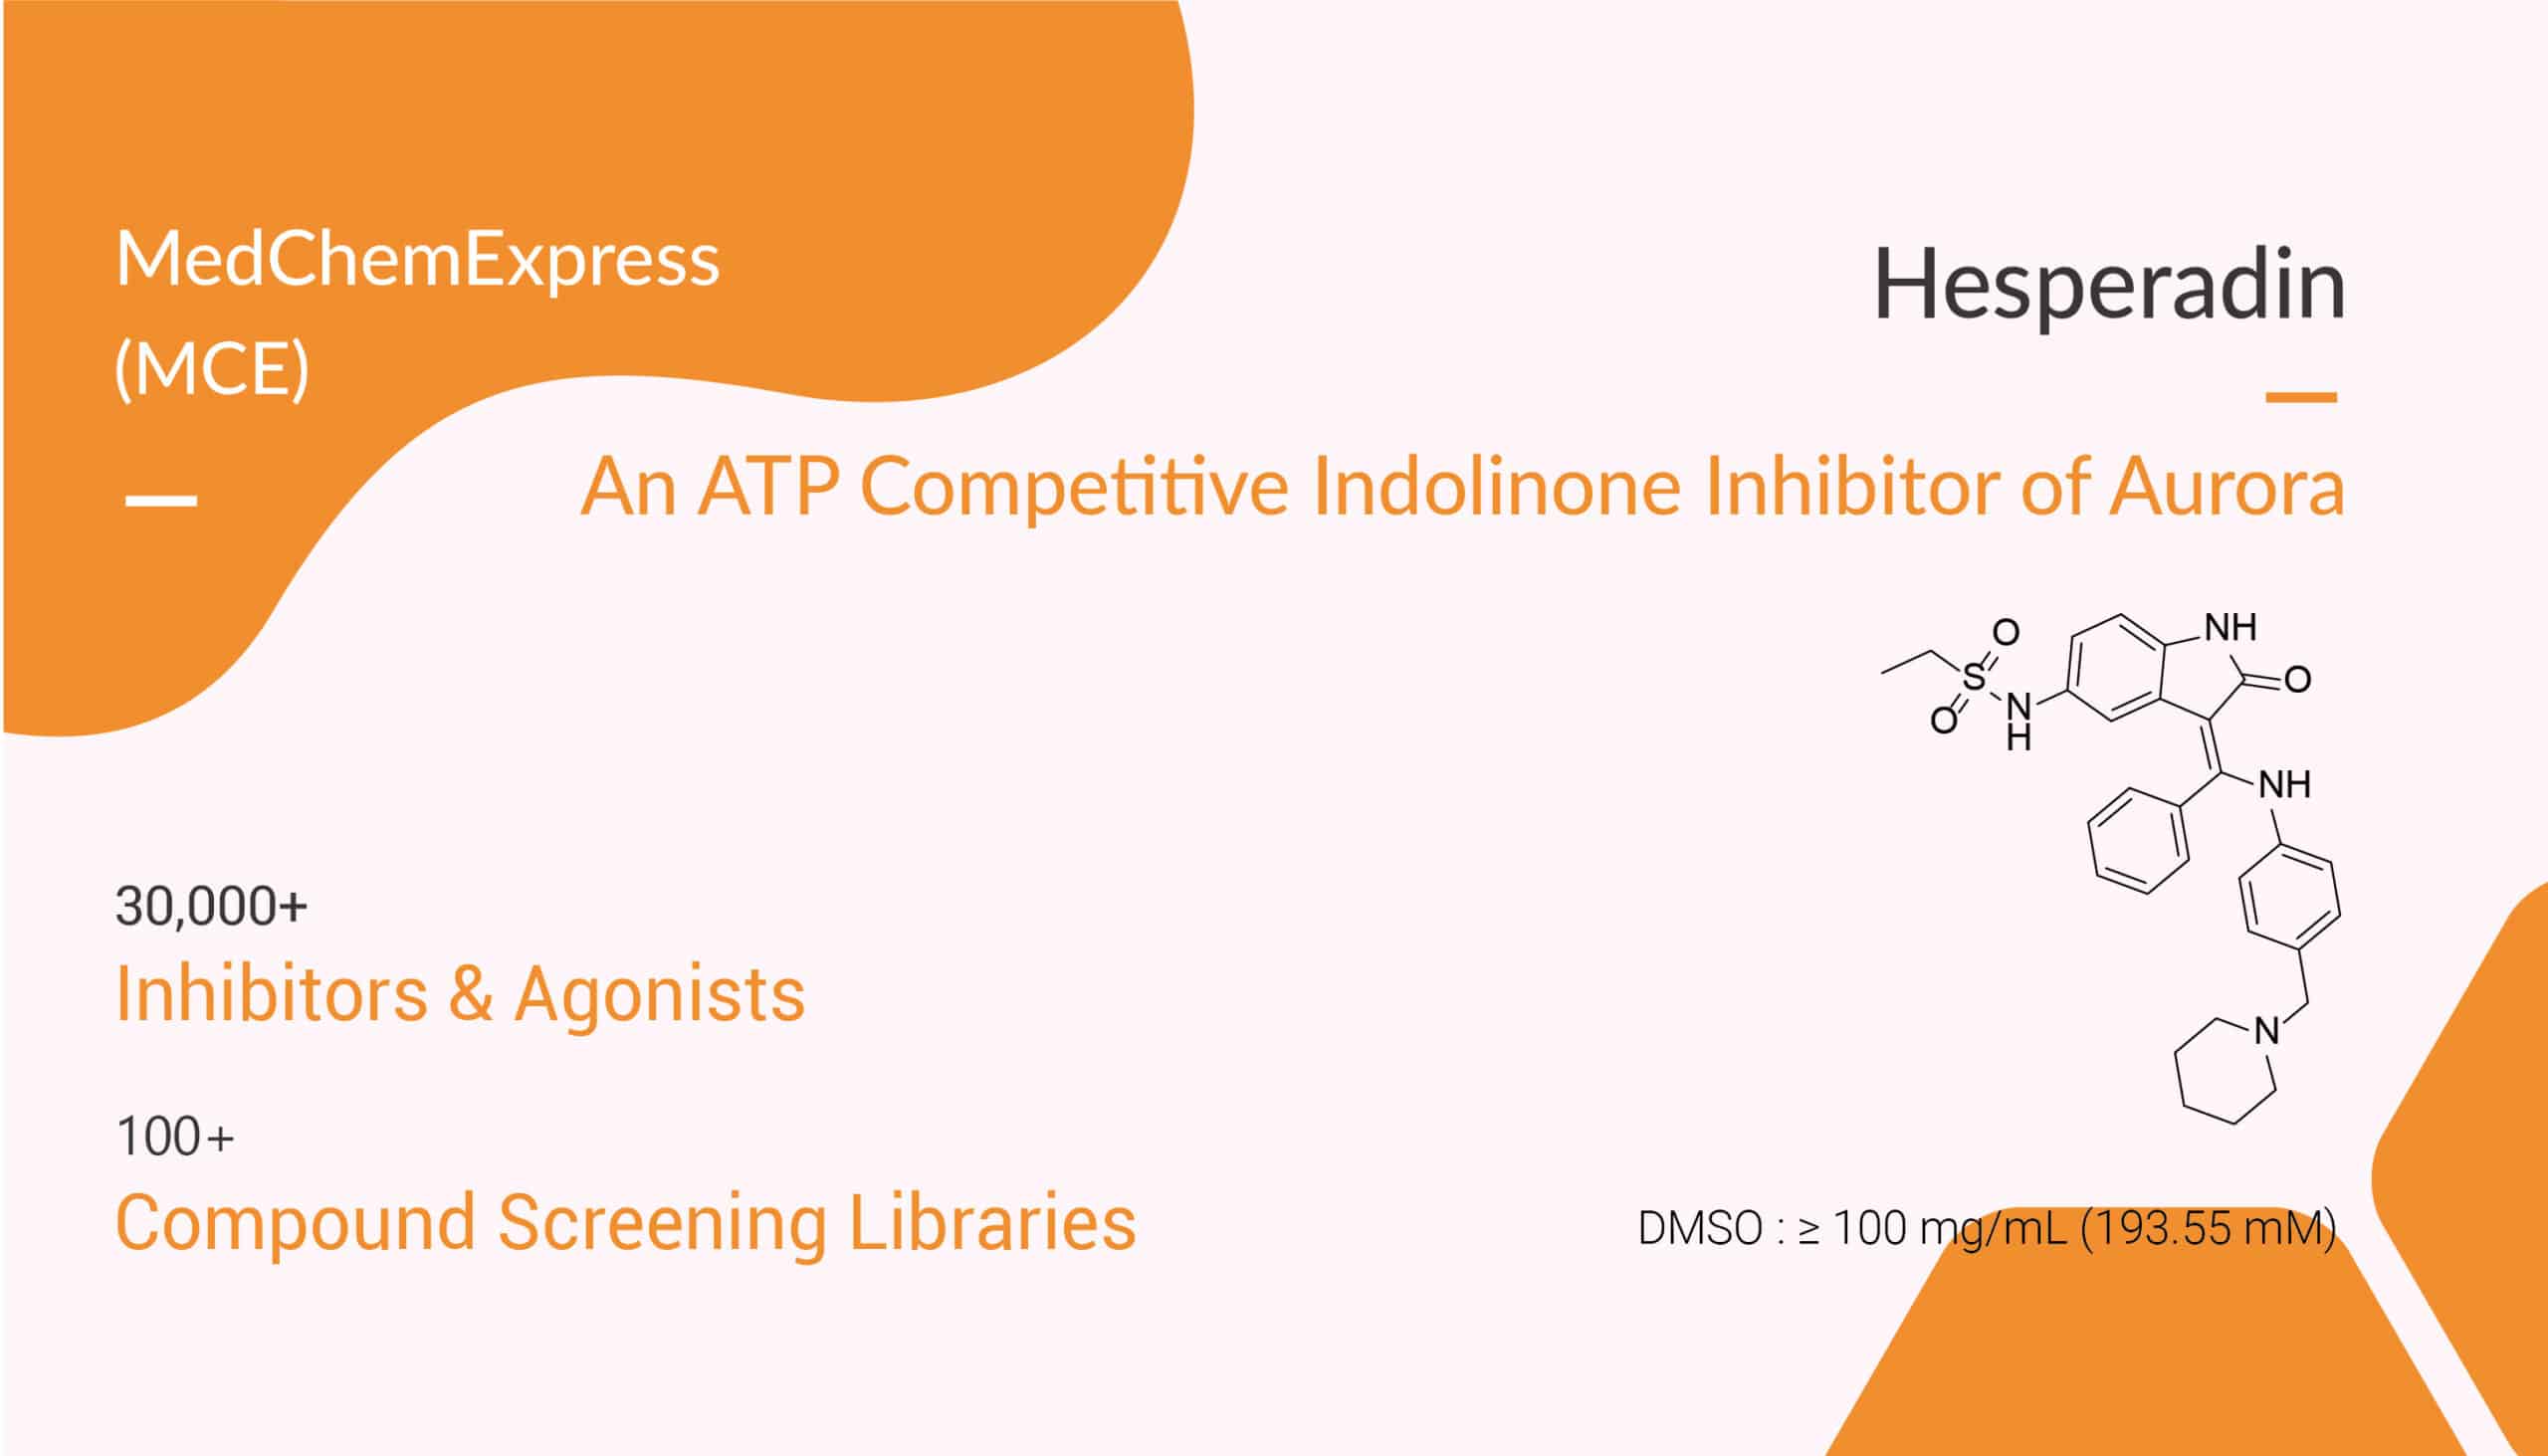 Hesperadin is an ATP Competitive Indolinone Inhibitor of Aurora A and B 2022 02 17 02 scaled - Hesperadin is an ATP Competitive Indolinone Inhibitor of Aurora A and B